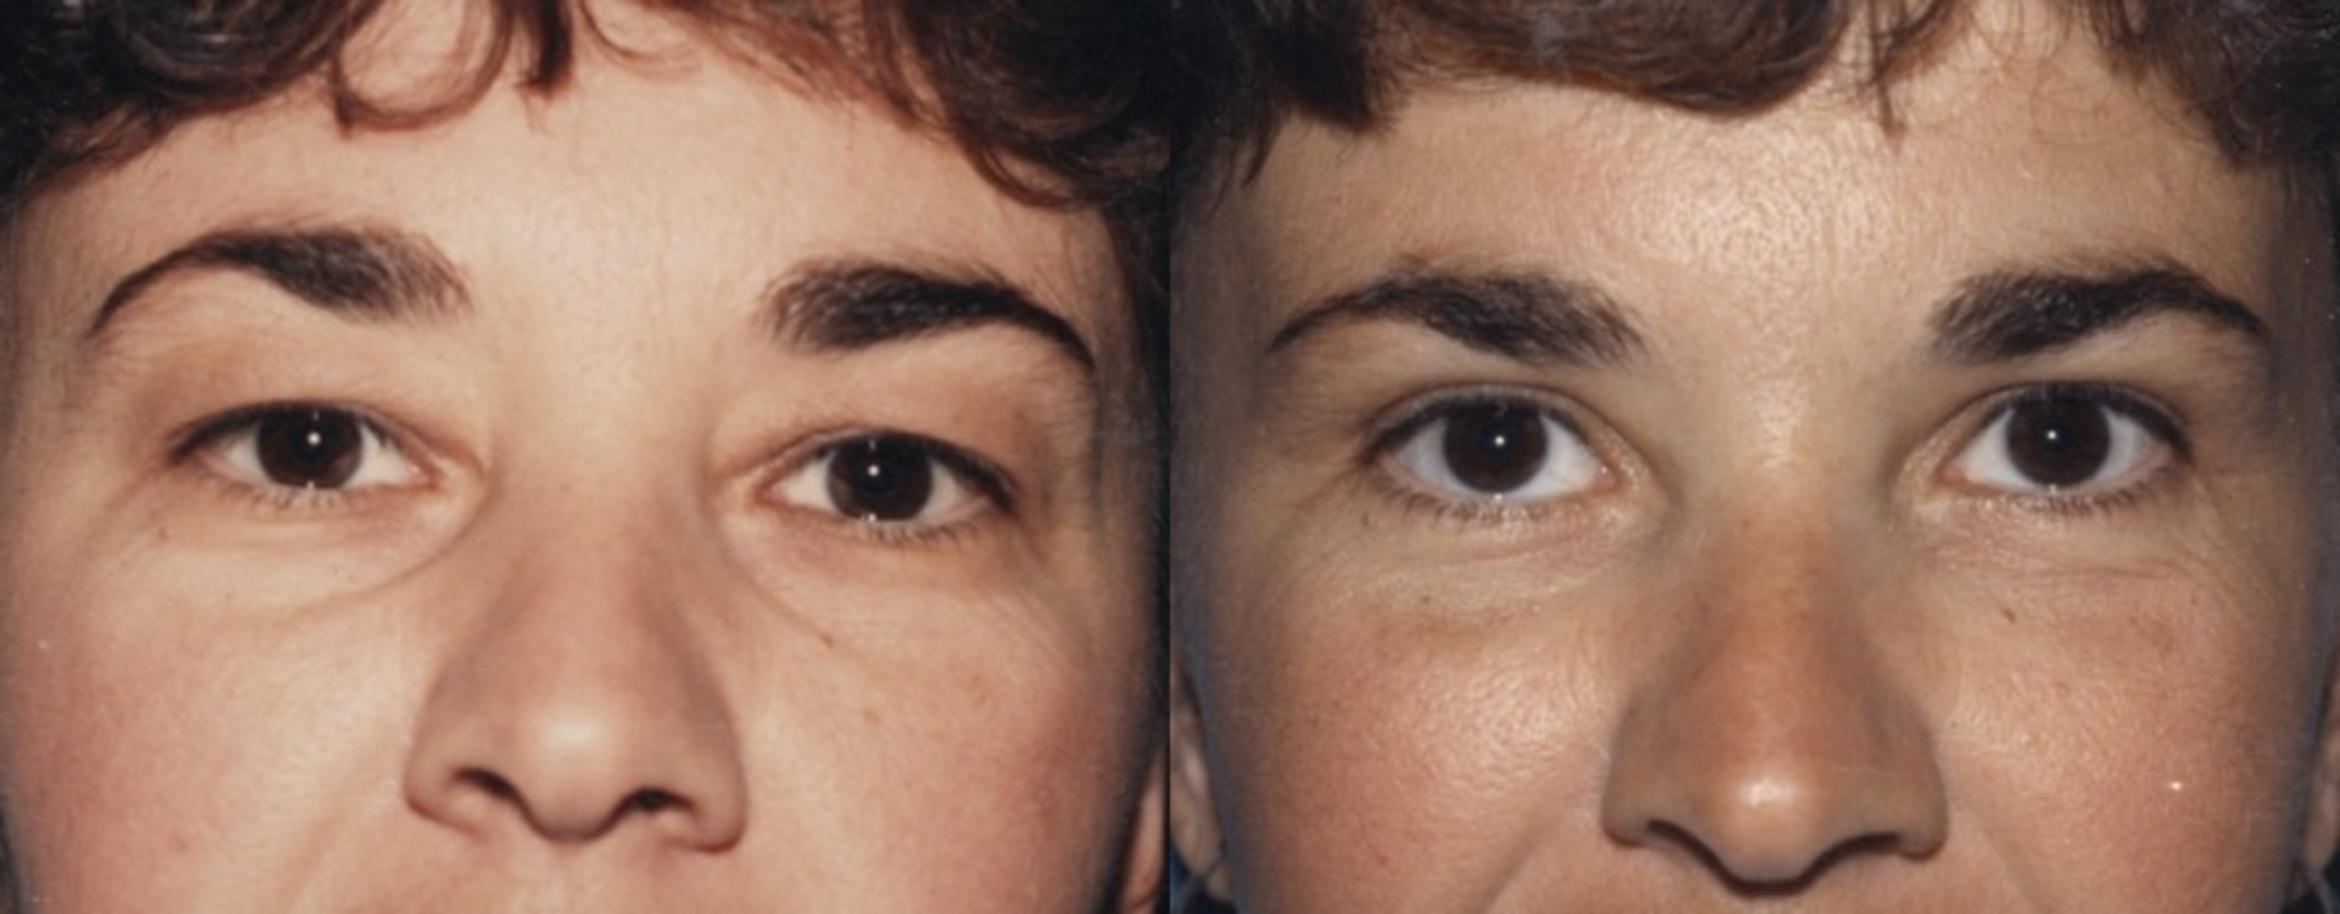 Blepharoplasty Before & After Photo | New Jersey & Pennsylvania,  | The Derm Group